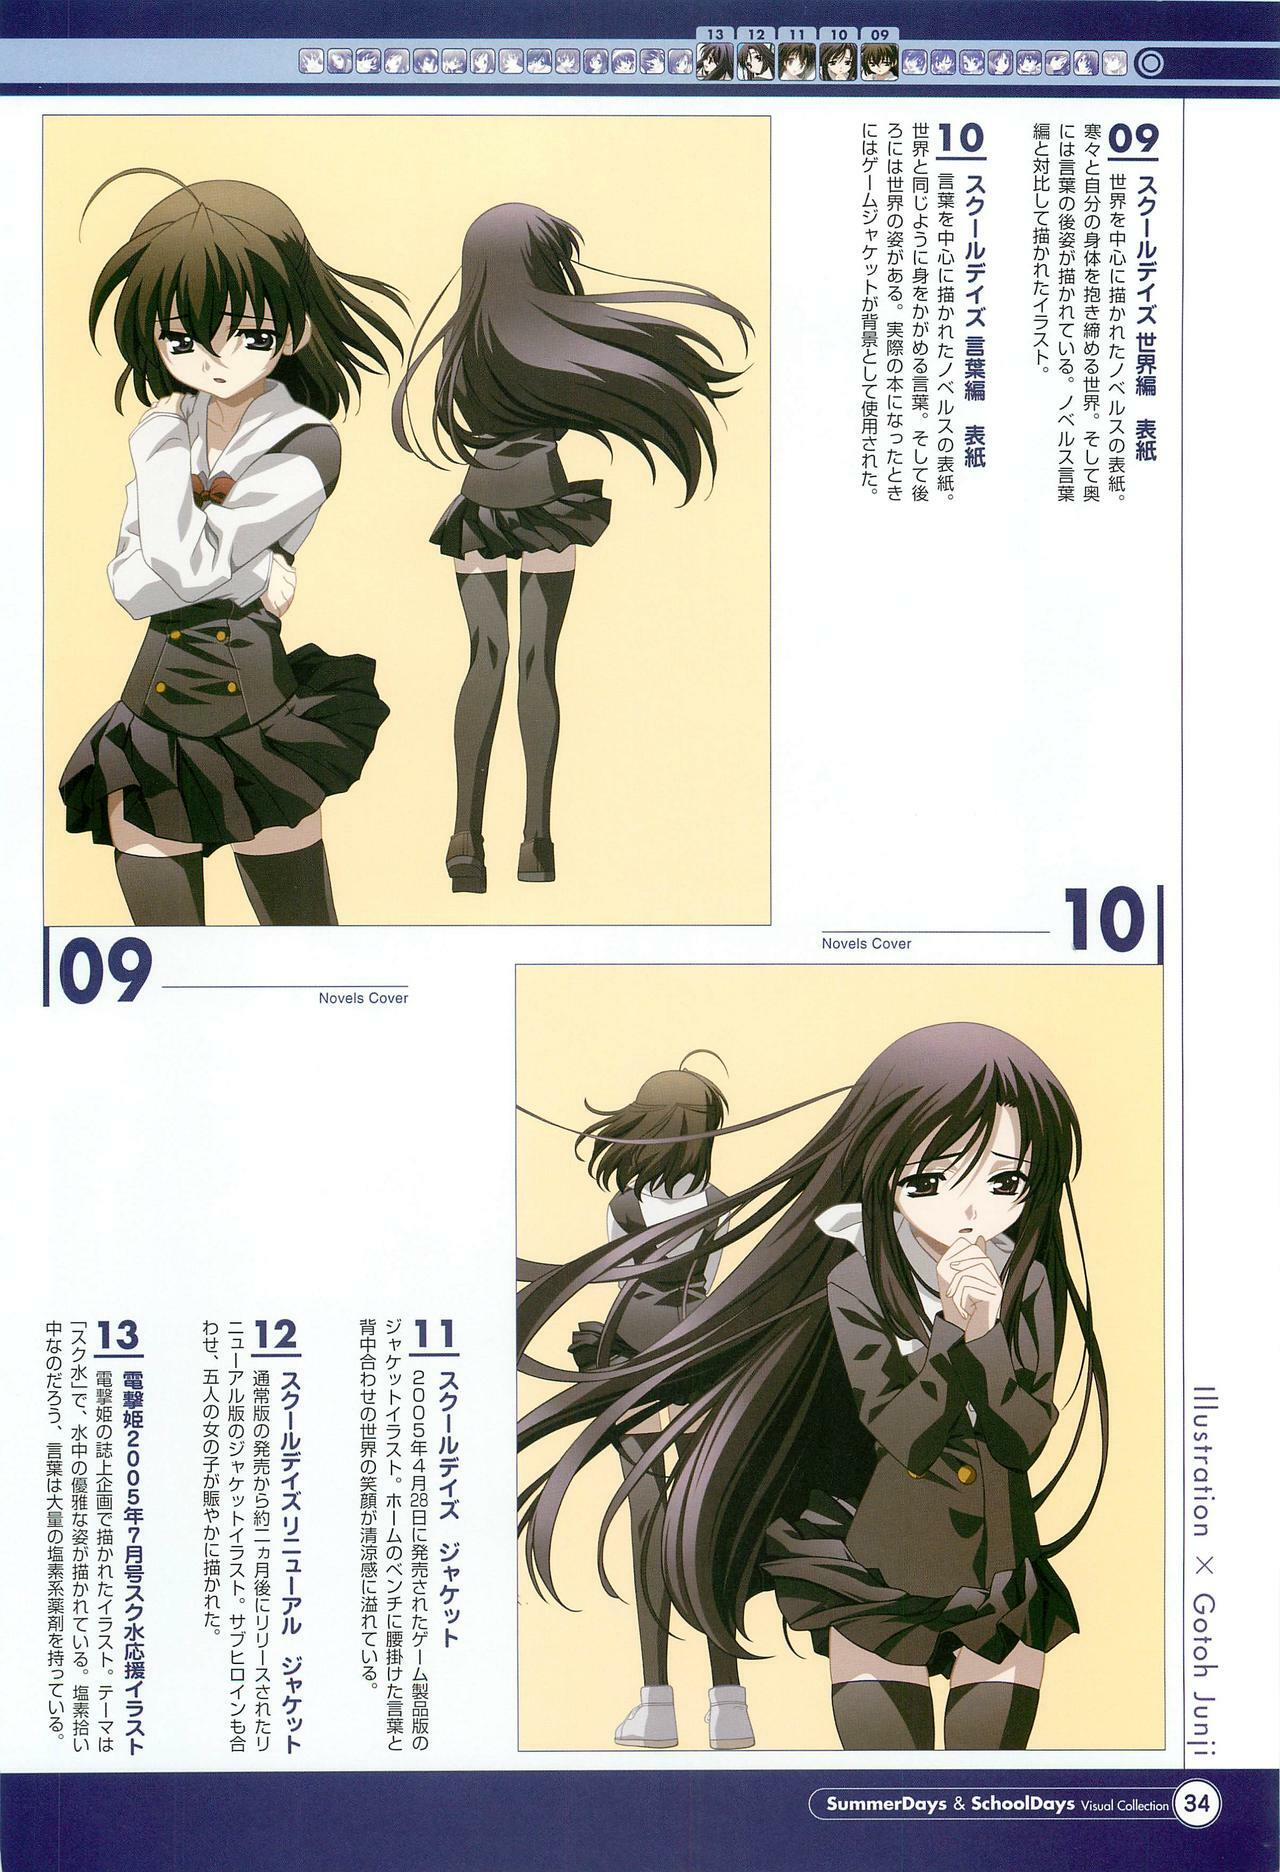 SummerDays & School Days Visual Collection page 36 full